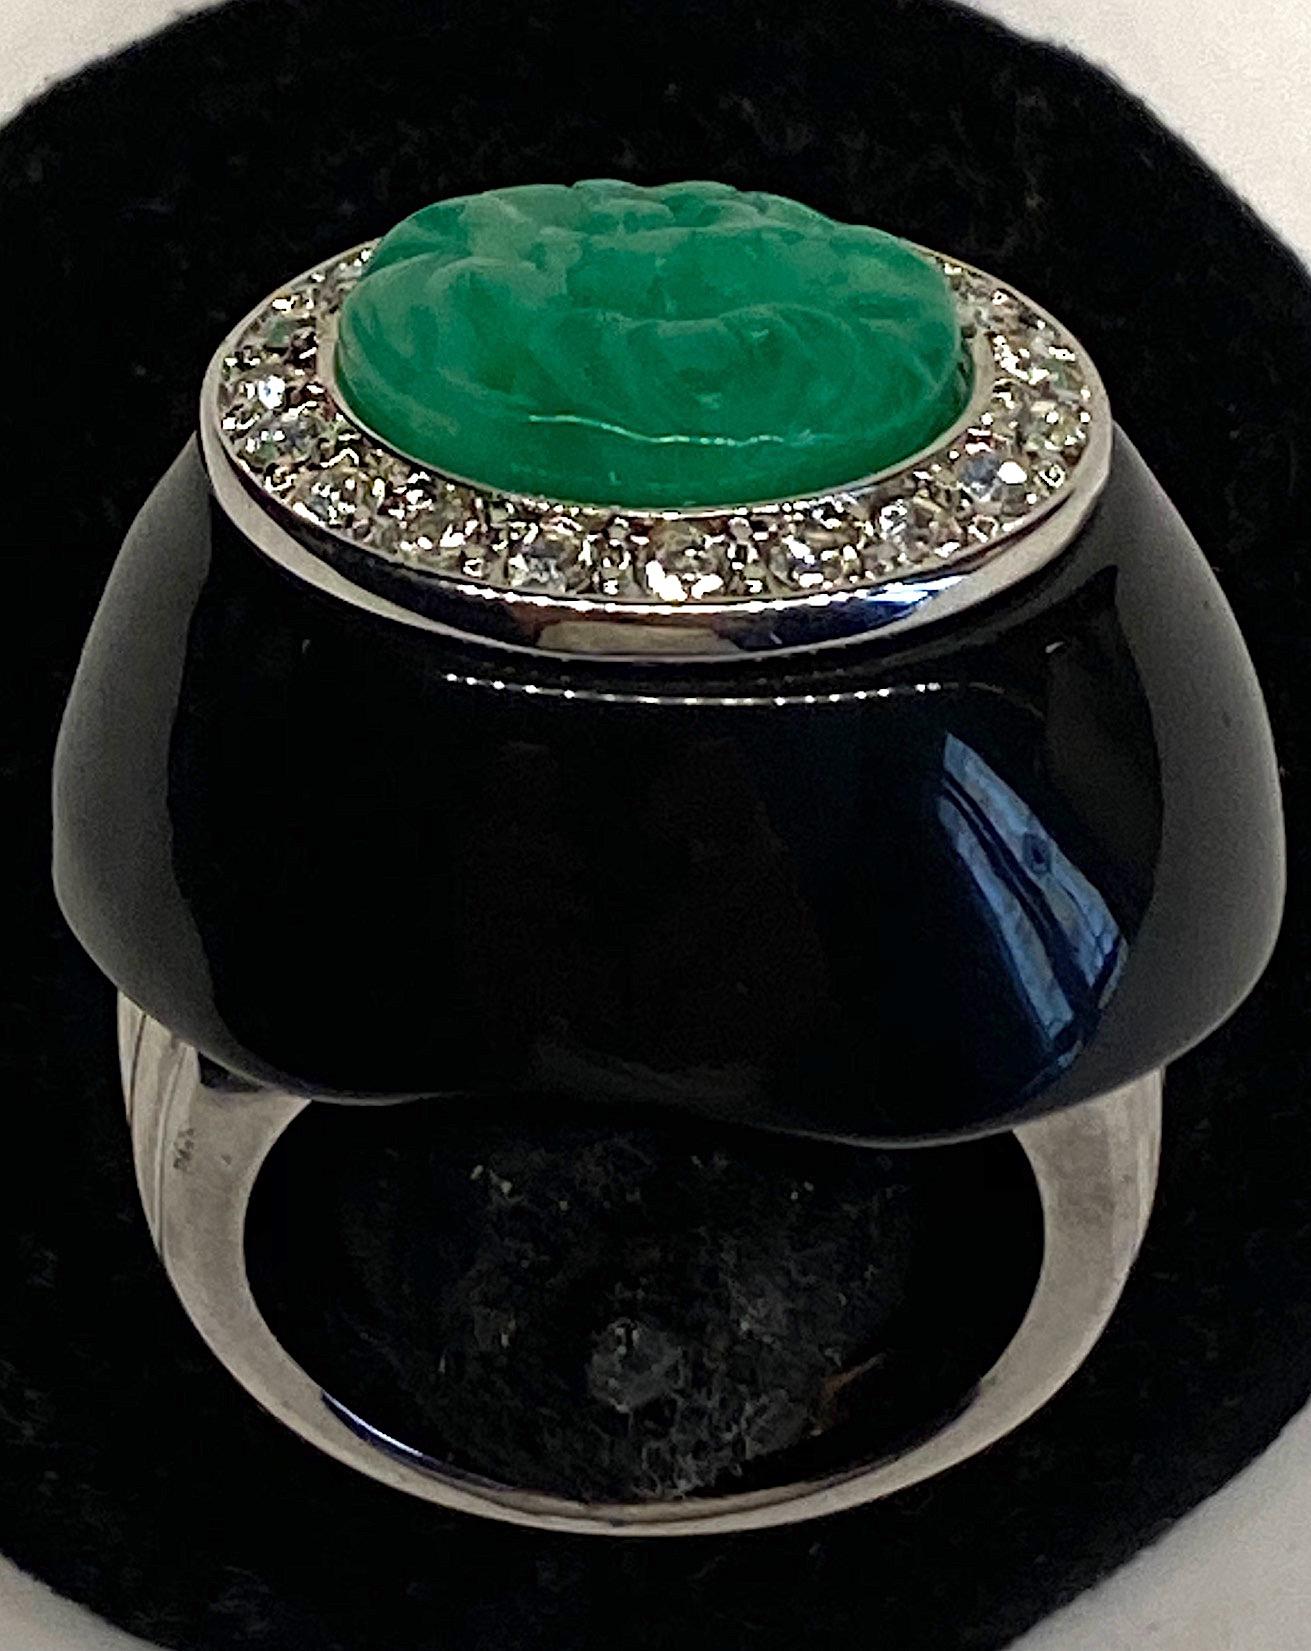 Kenneth Jay Lane 1980s Art Deco Black & Green Dome Ring 8